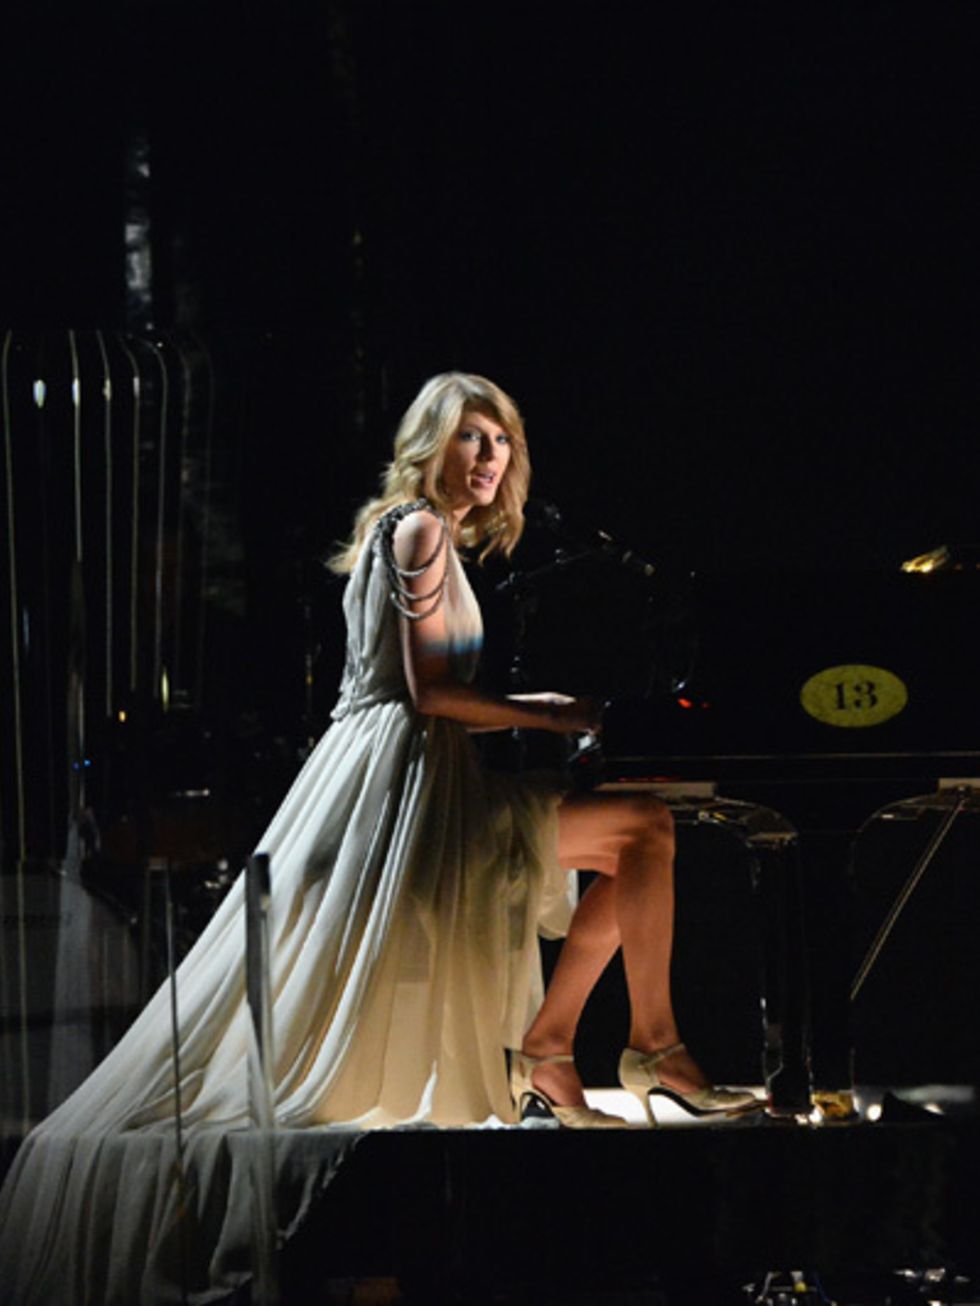 Pianist, Musical instrument, Dress, Stage, Keyboard, Piano, Music venue, Recital, Blond, Long hair, 